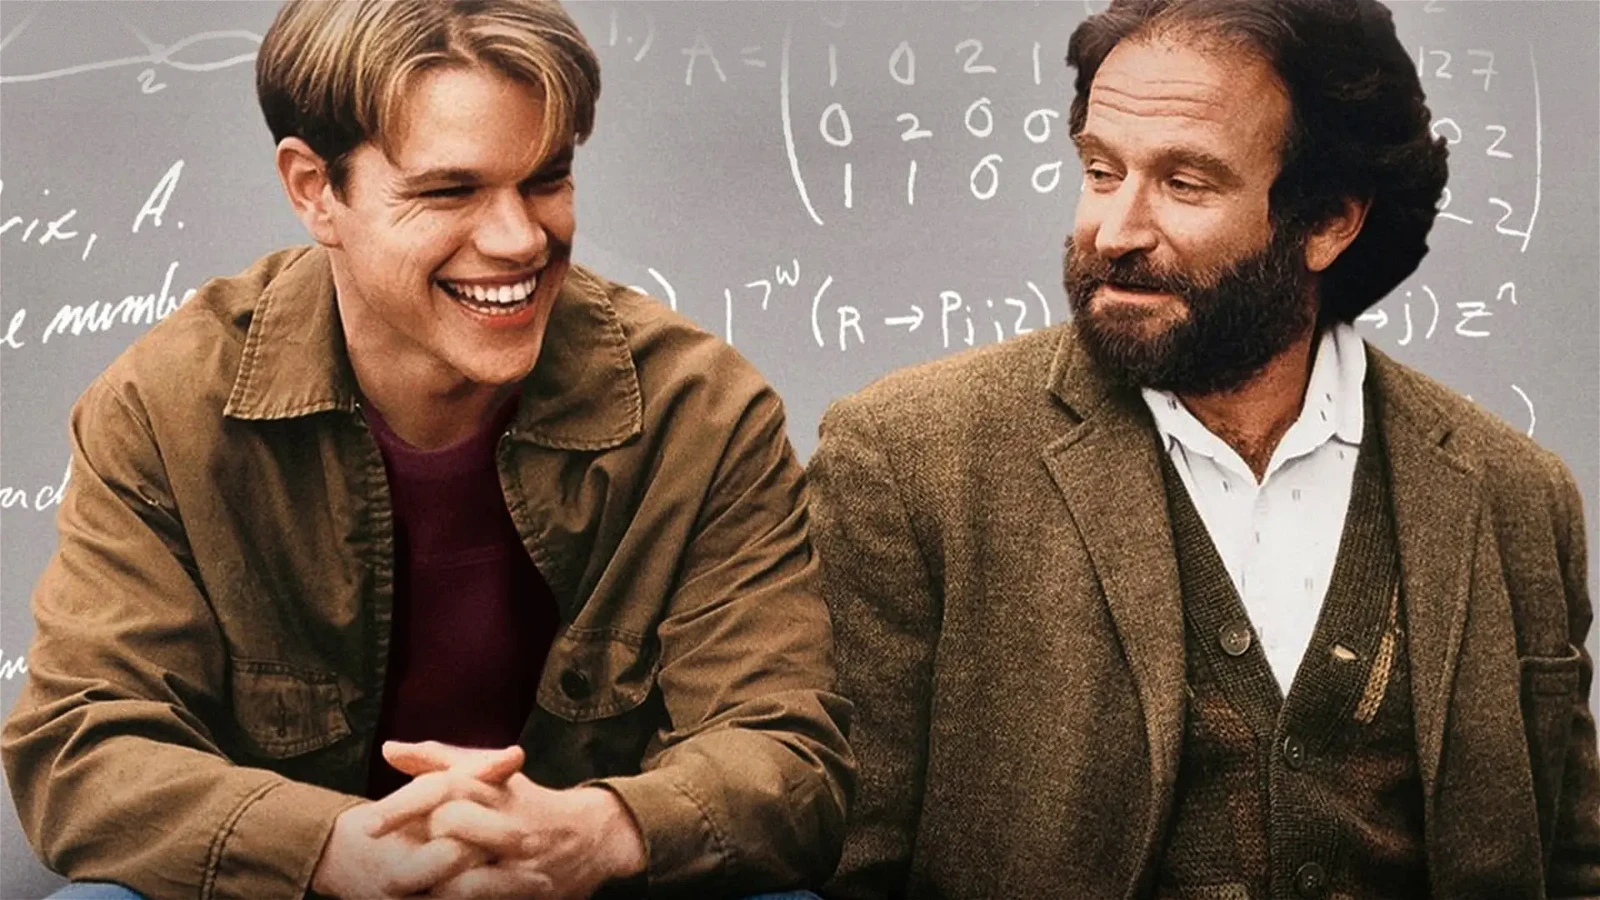 Good Will Hunting remains one of the most iconic films in Hollywood